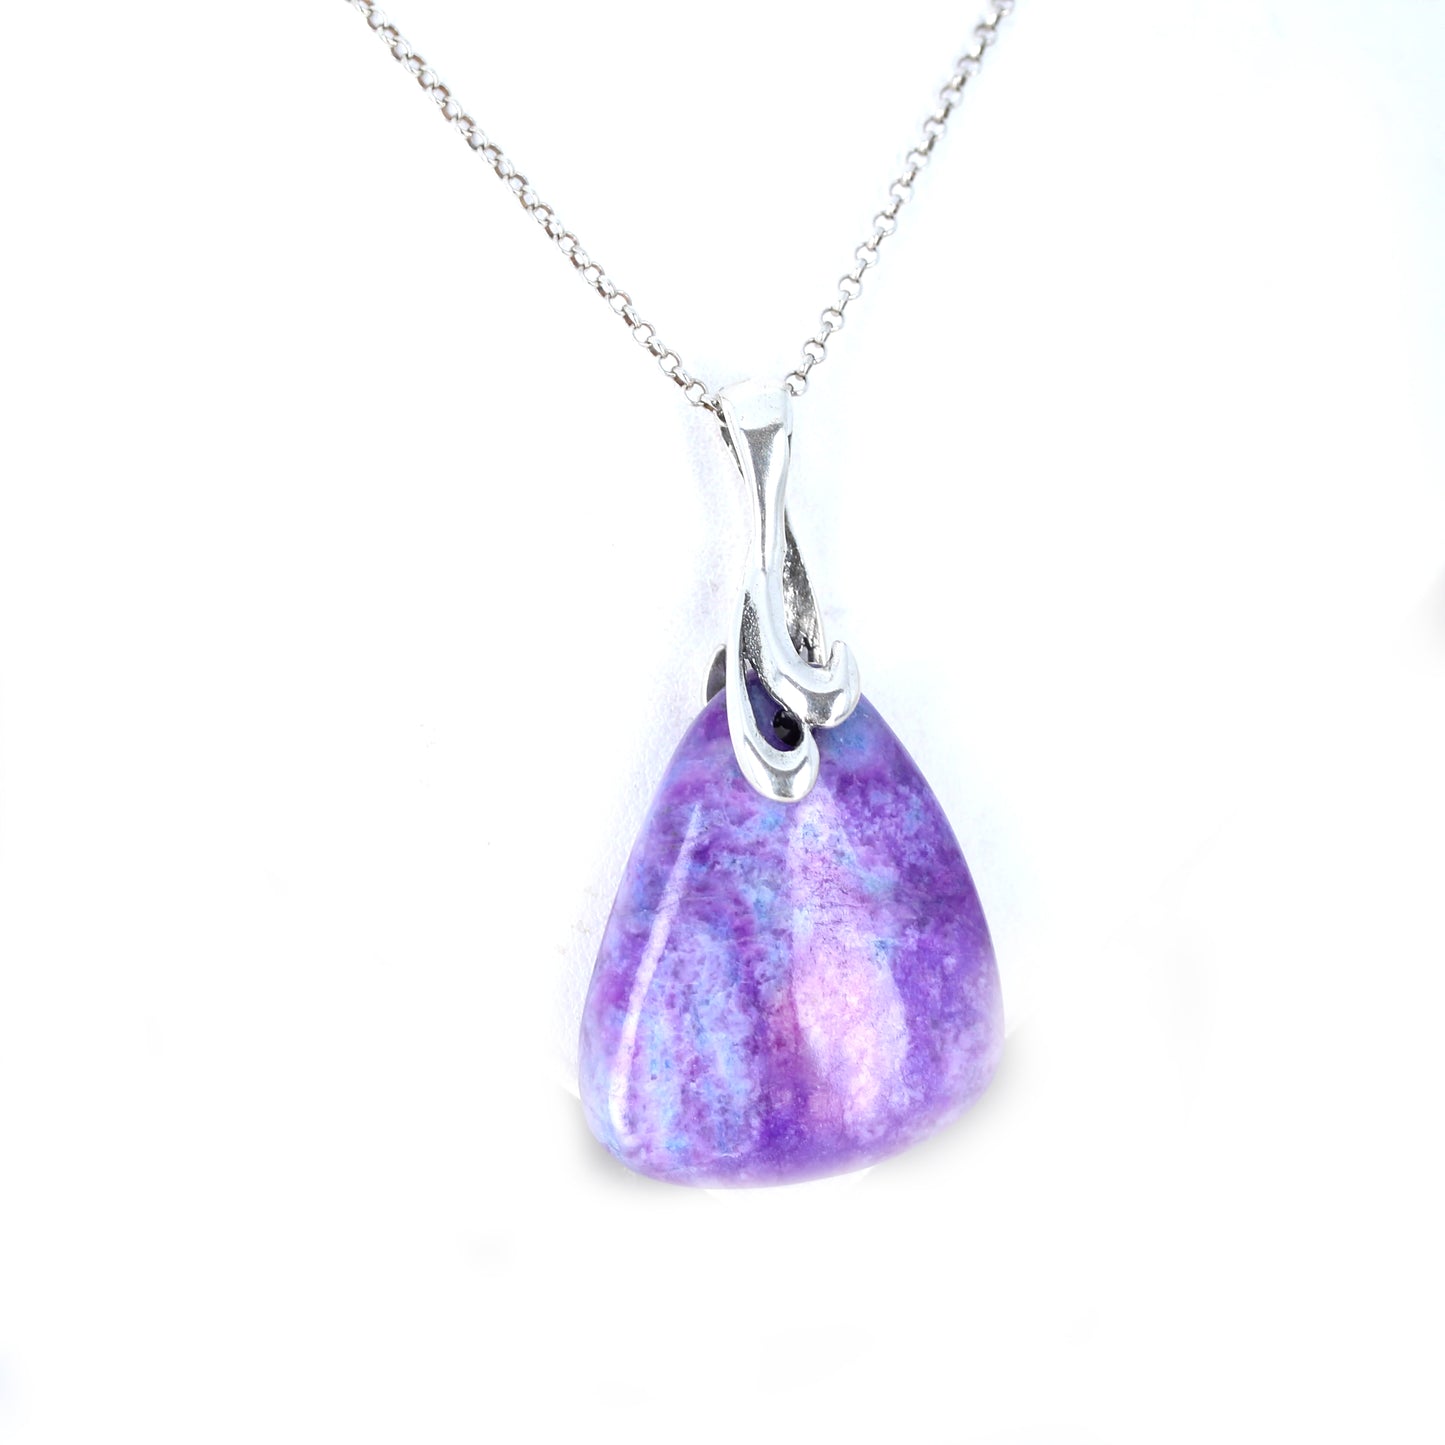 5 Star Regal SUGILITE Pendant Sterling Silver Chain and Bail #2